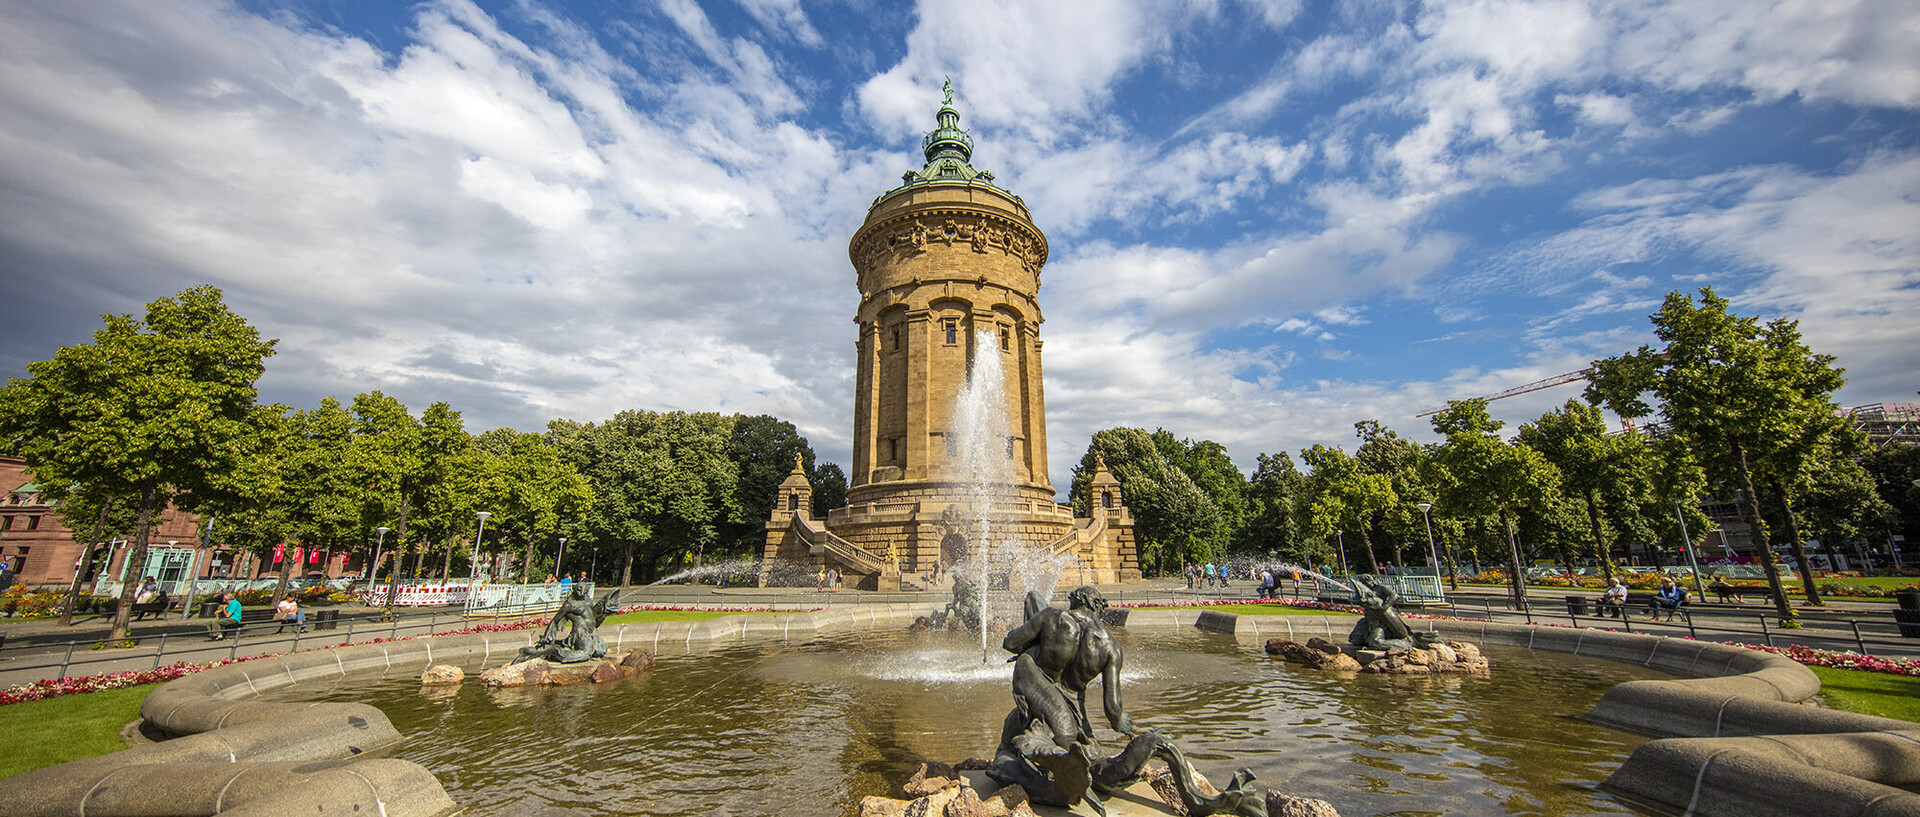 Water tower Mannheim with fountain in the foreground